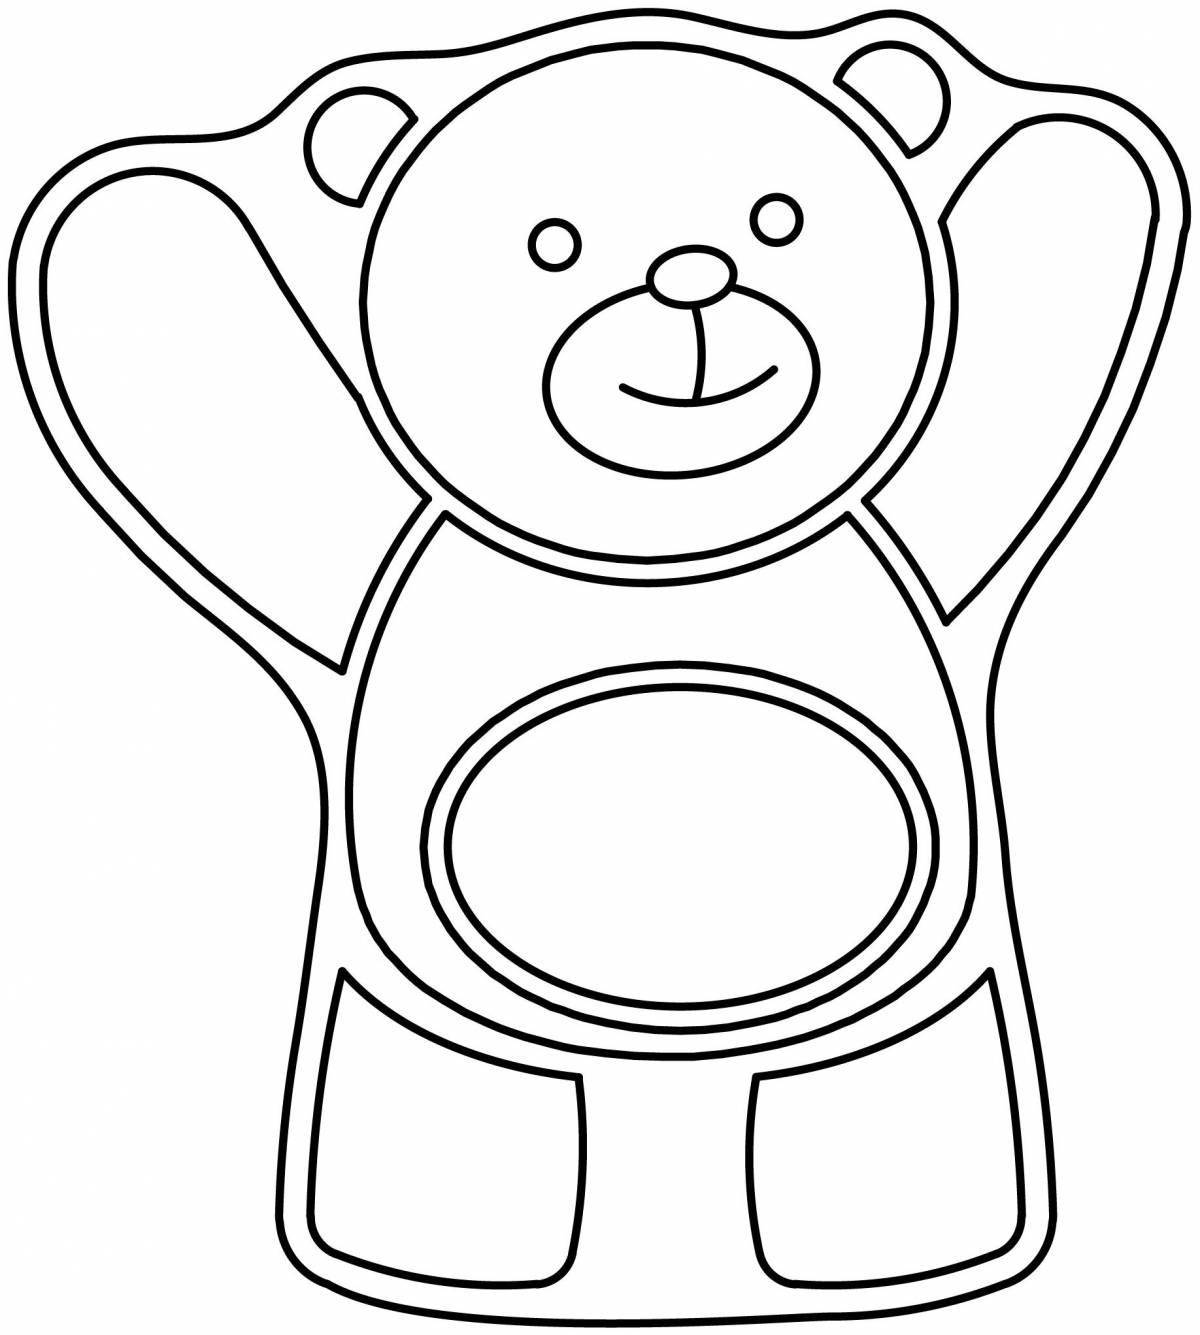 Playful teddy bear coloring book for 5-6 year olds